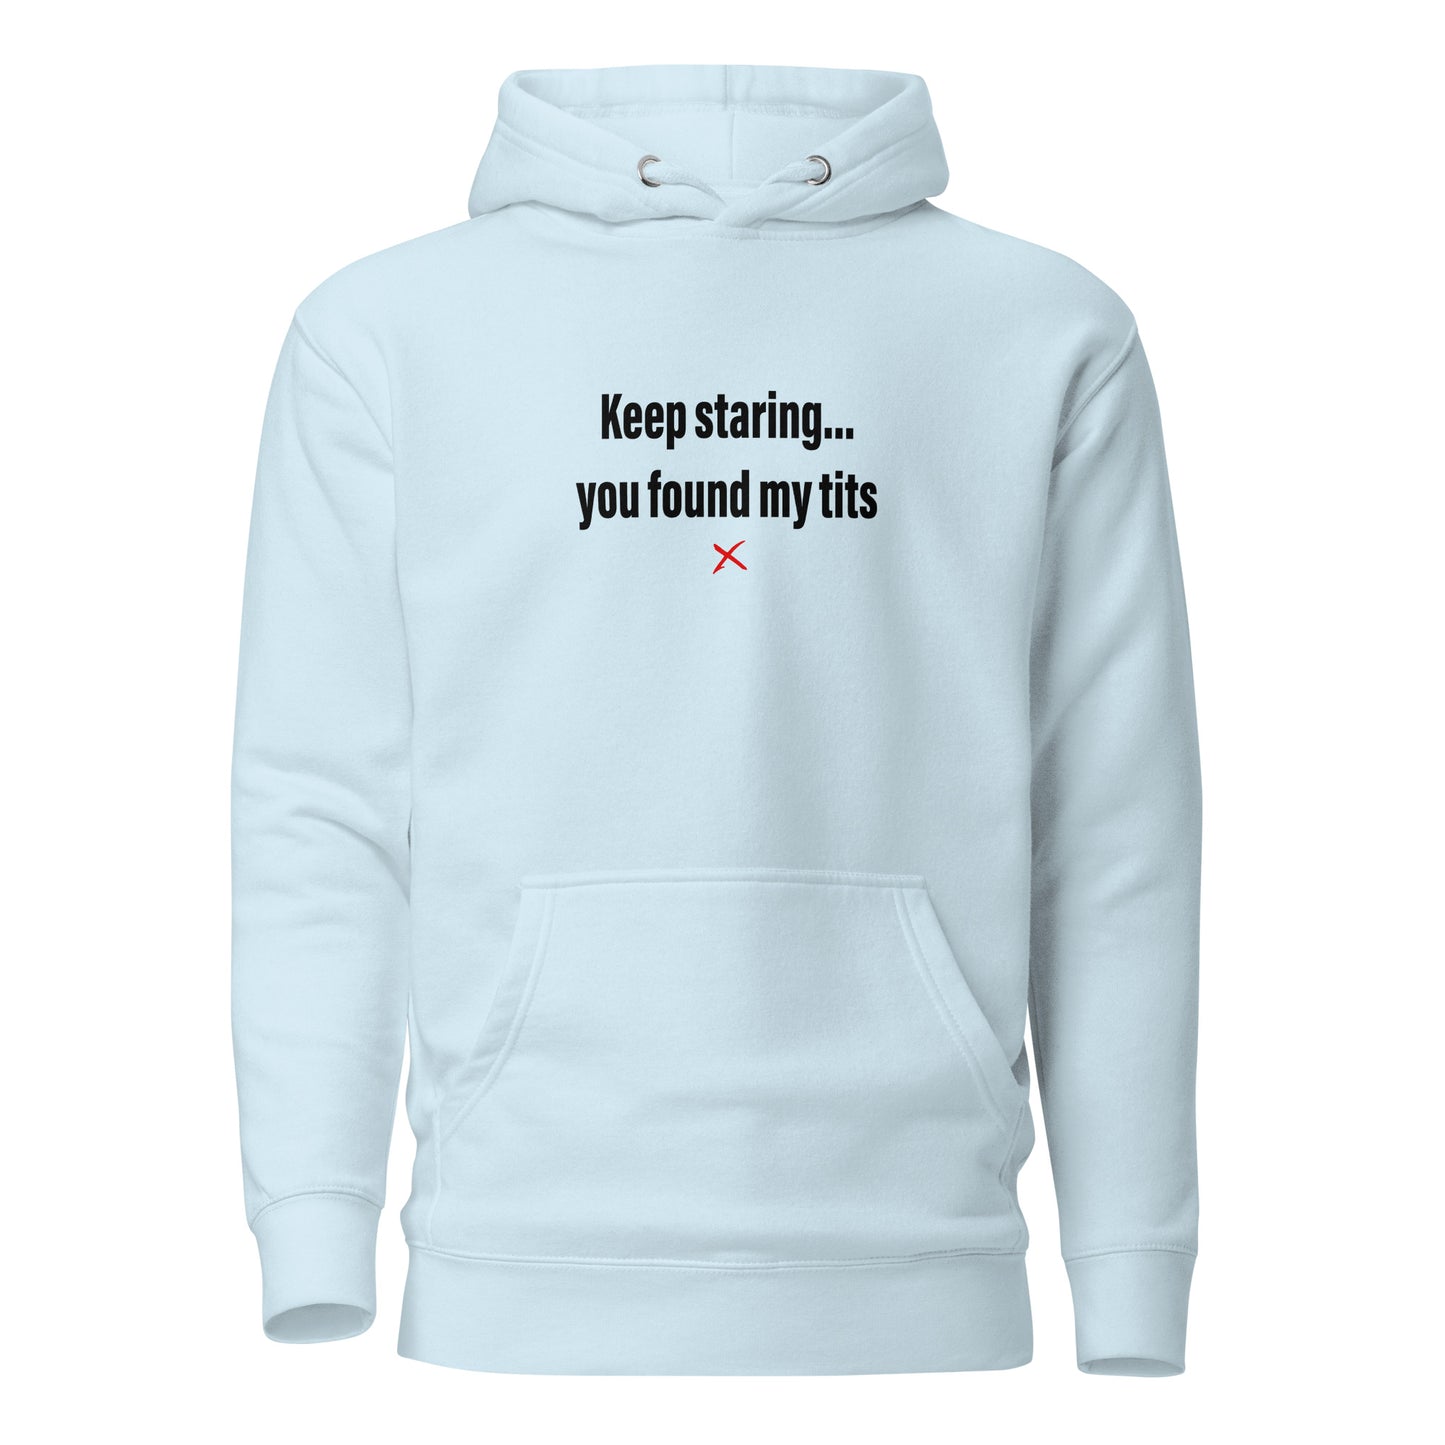 Keep staring... you found my tits - Hoodie